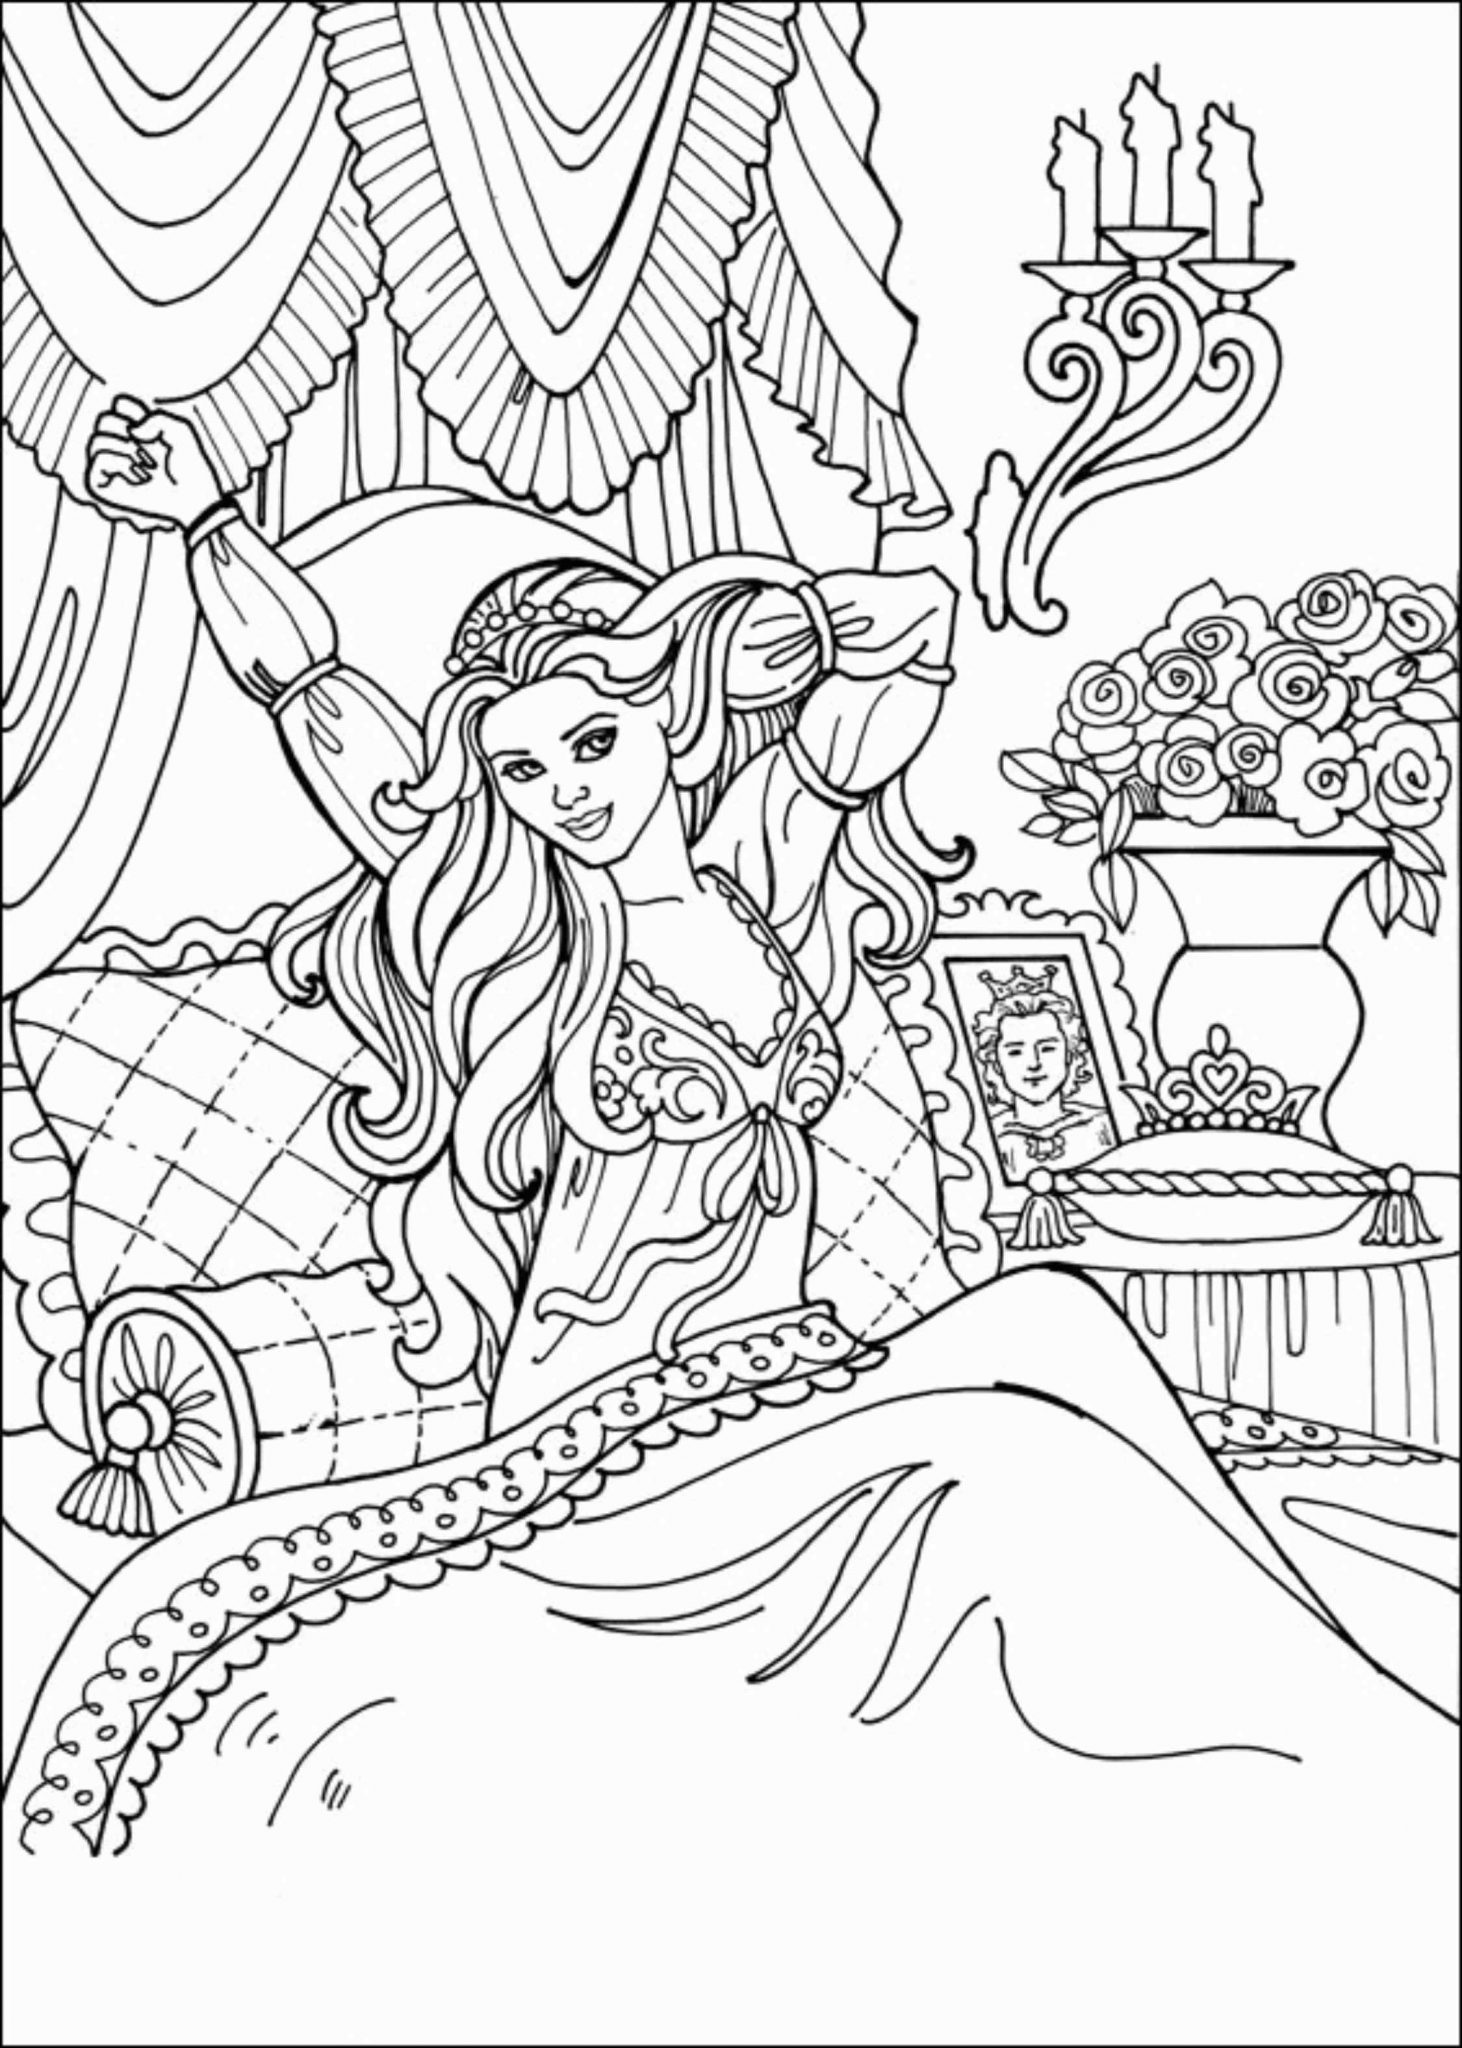 Print & Download - Princess Coloring Pages, Support The ...